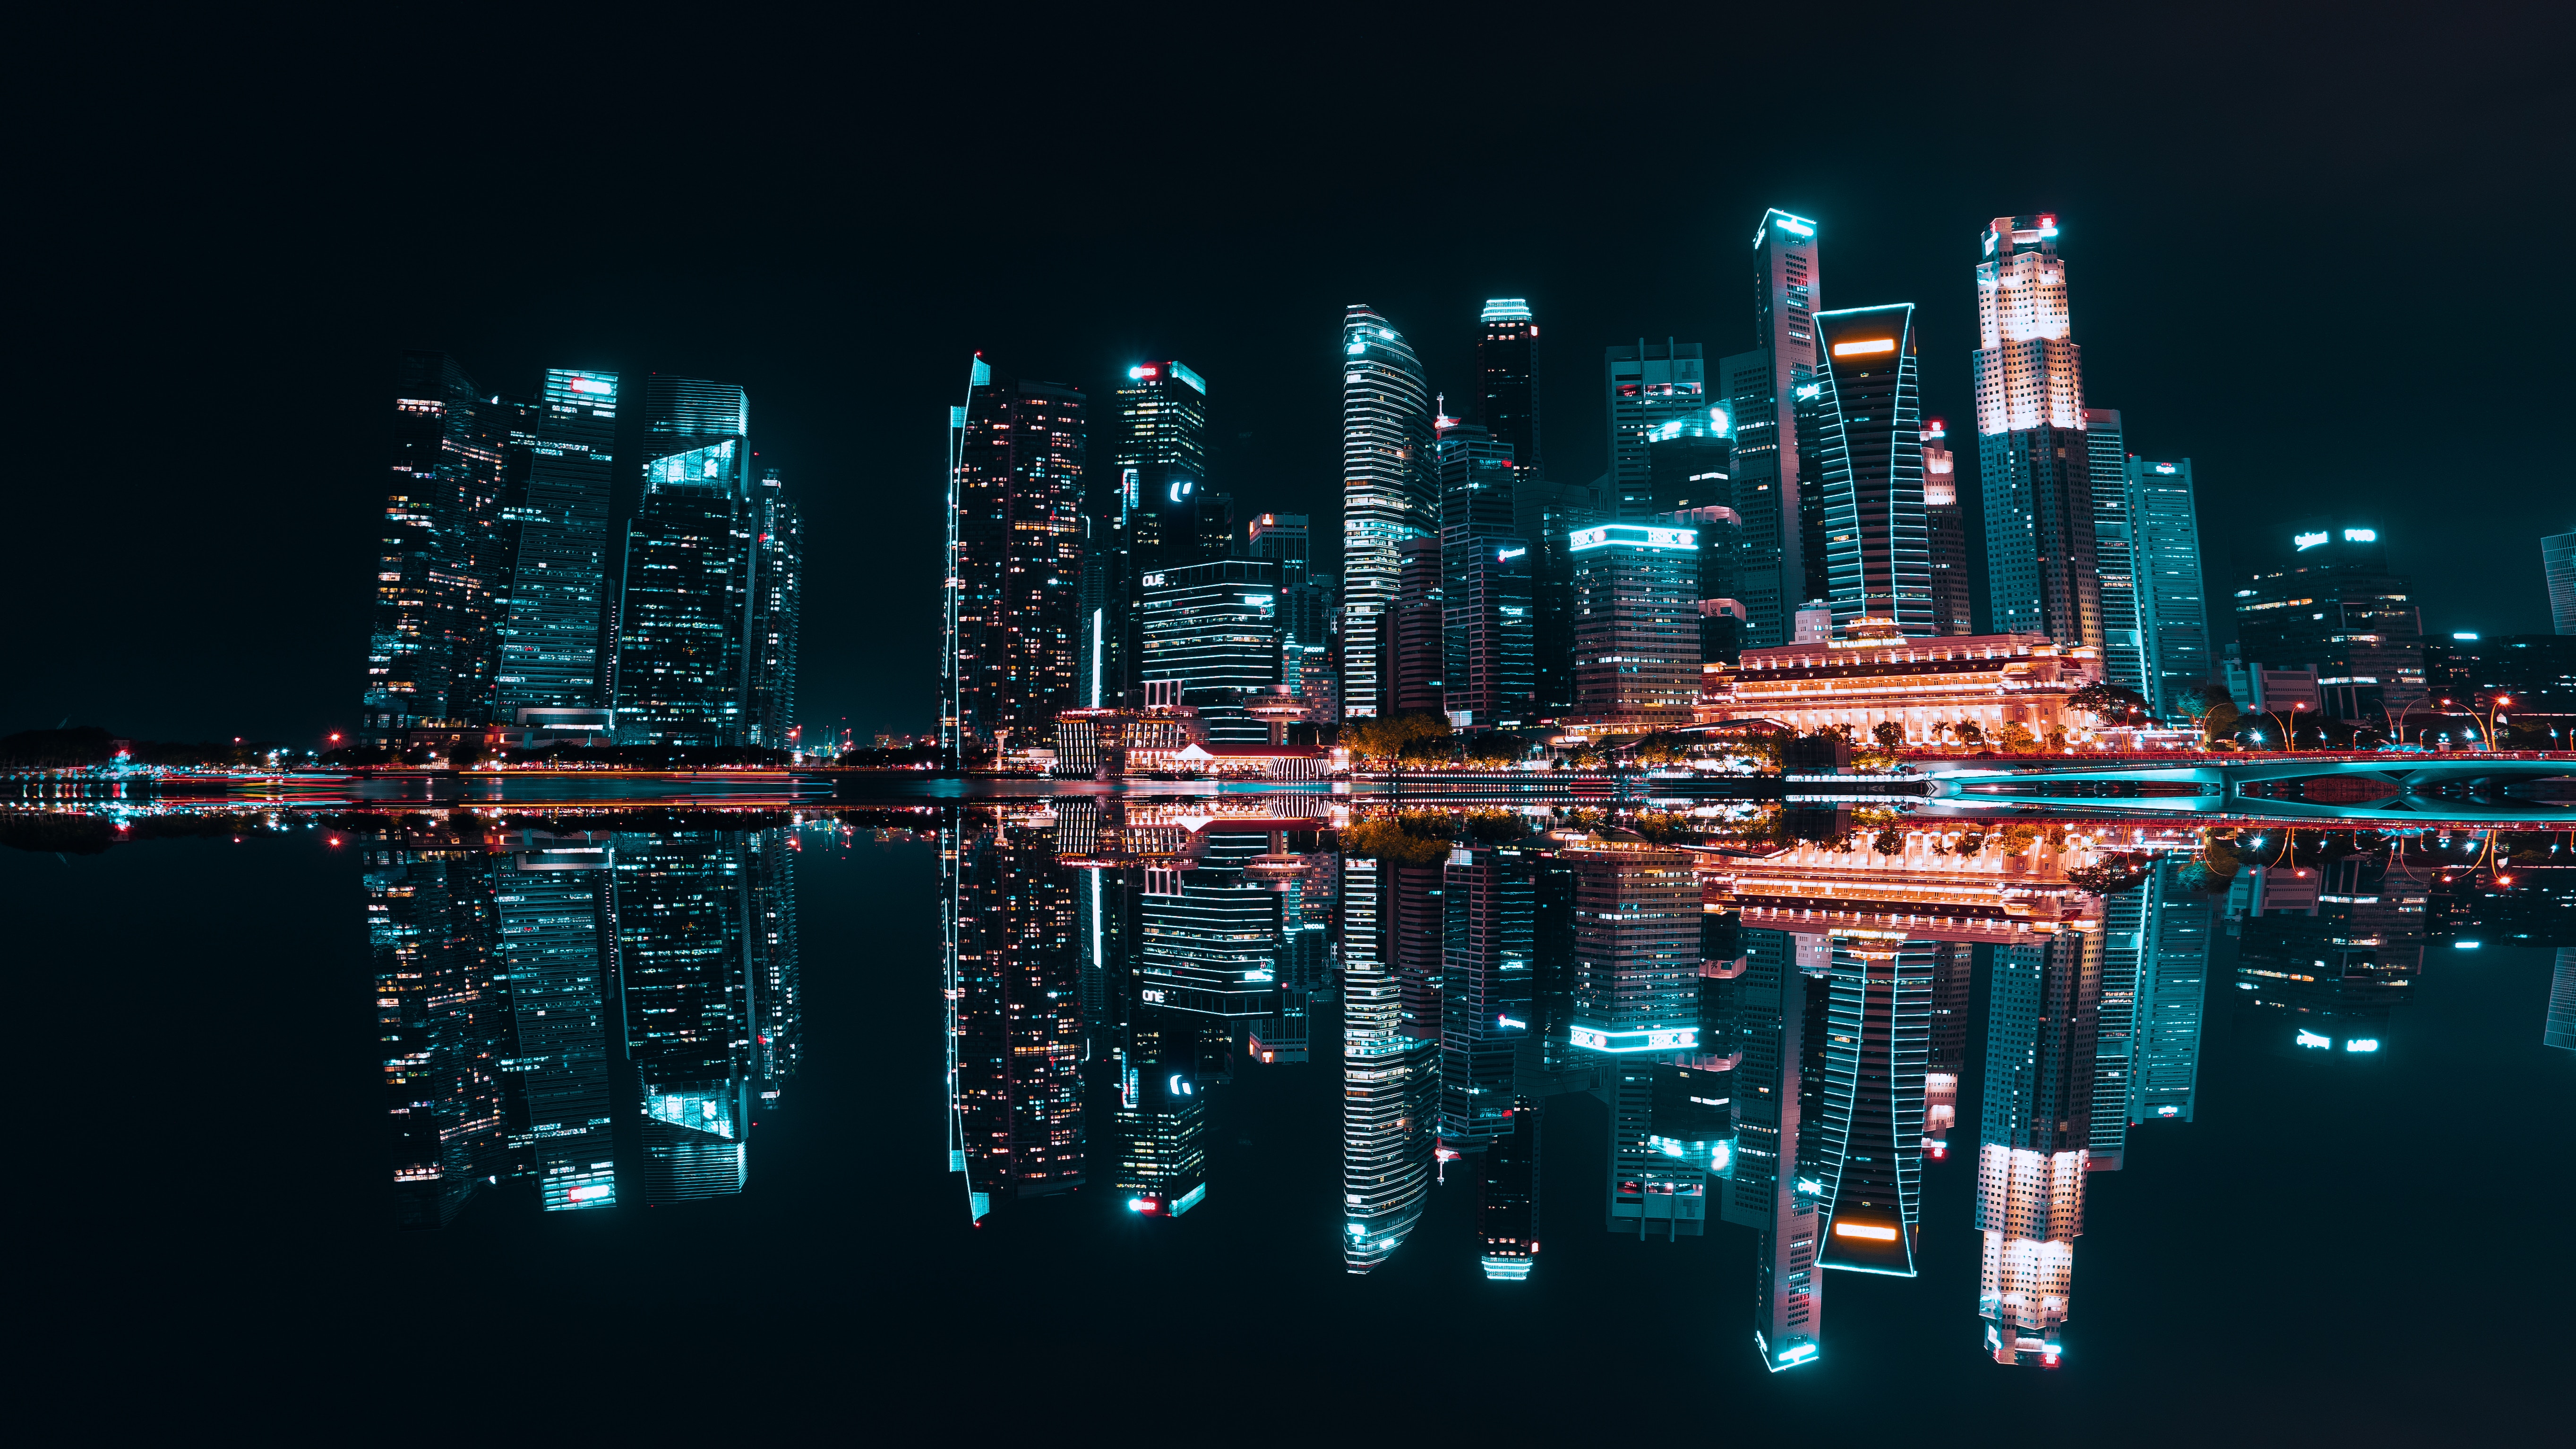 night city, illumination, lake, cities, building, reflection, skyscrapers, backlight, electricity Phone Background